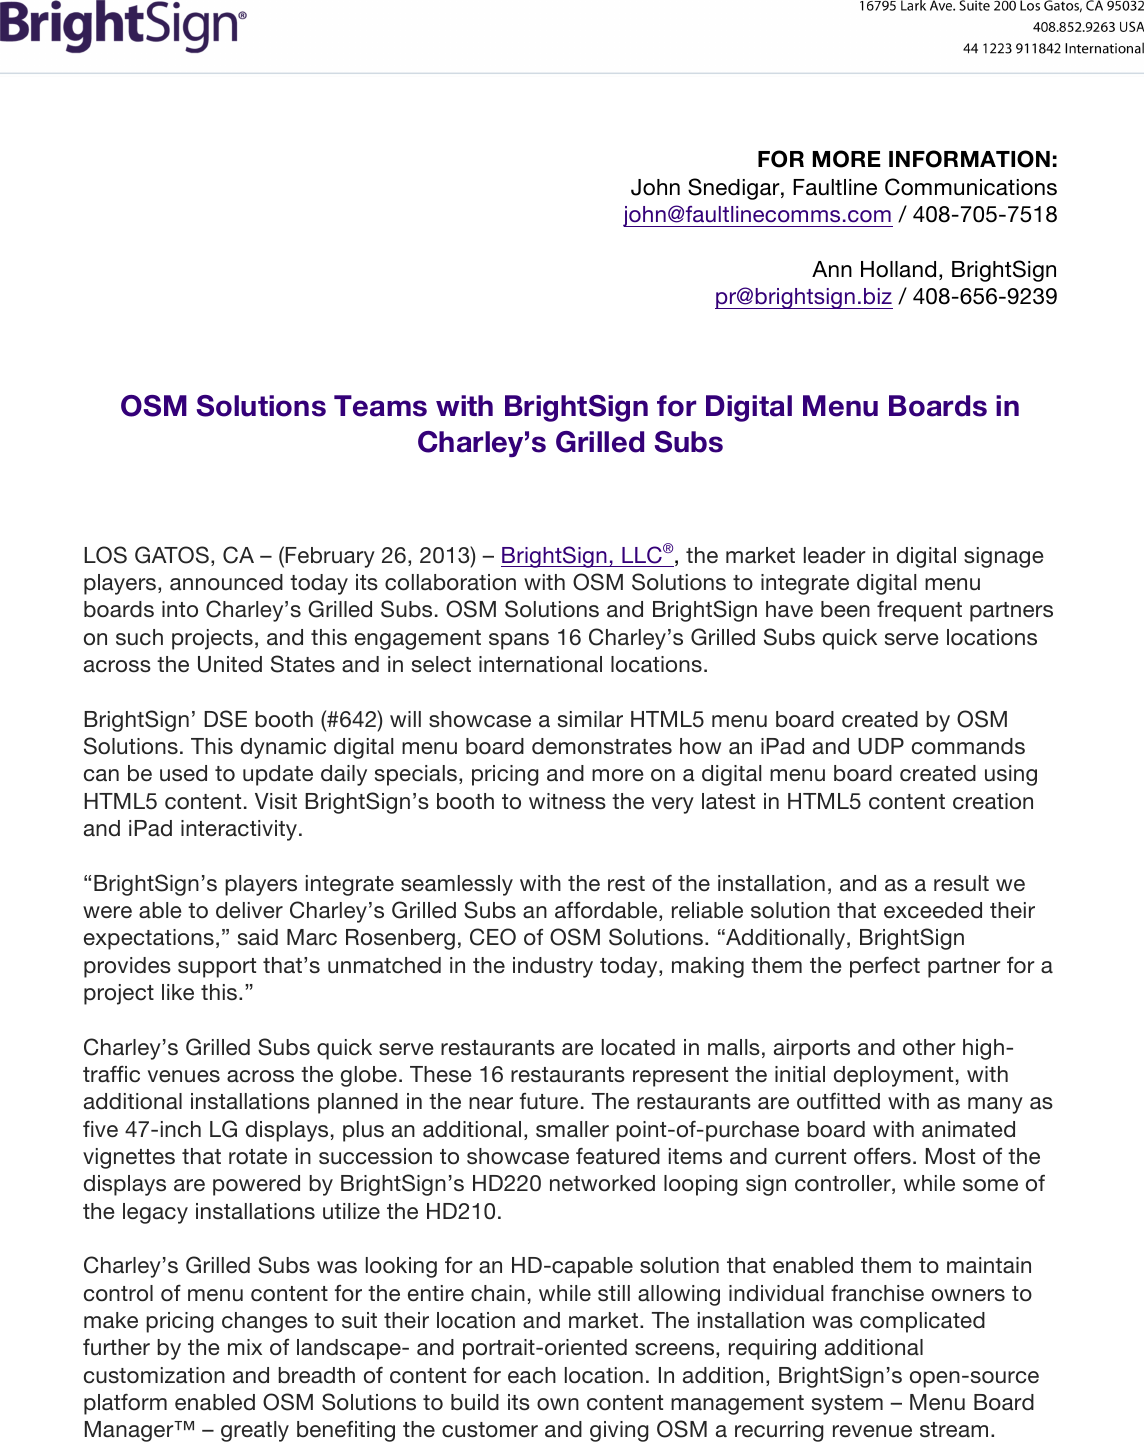 Page 1 of 2 - BrightSign DSE Charleys Grilled Subs Press Release  OSM Solutions Teams With Bright Sign For Digital Menu Boards